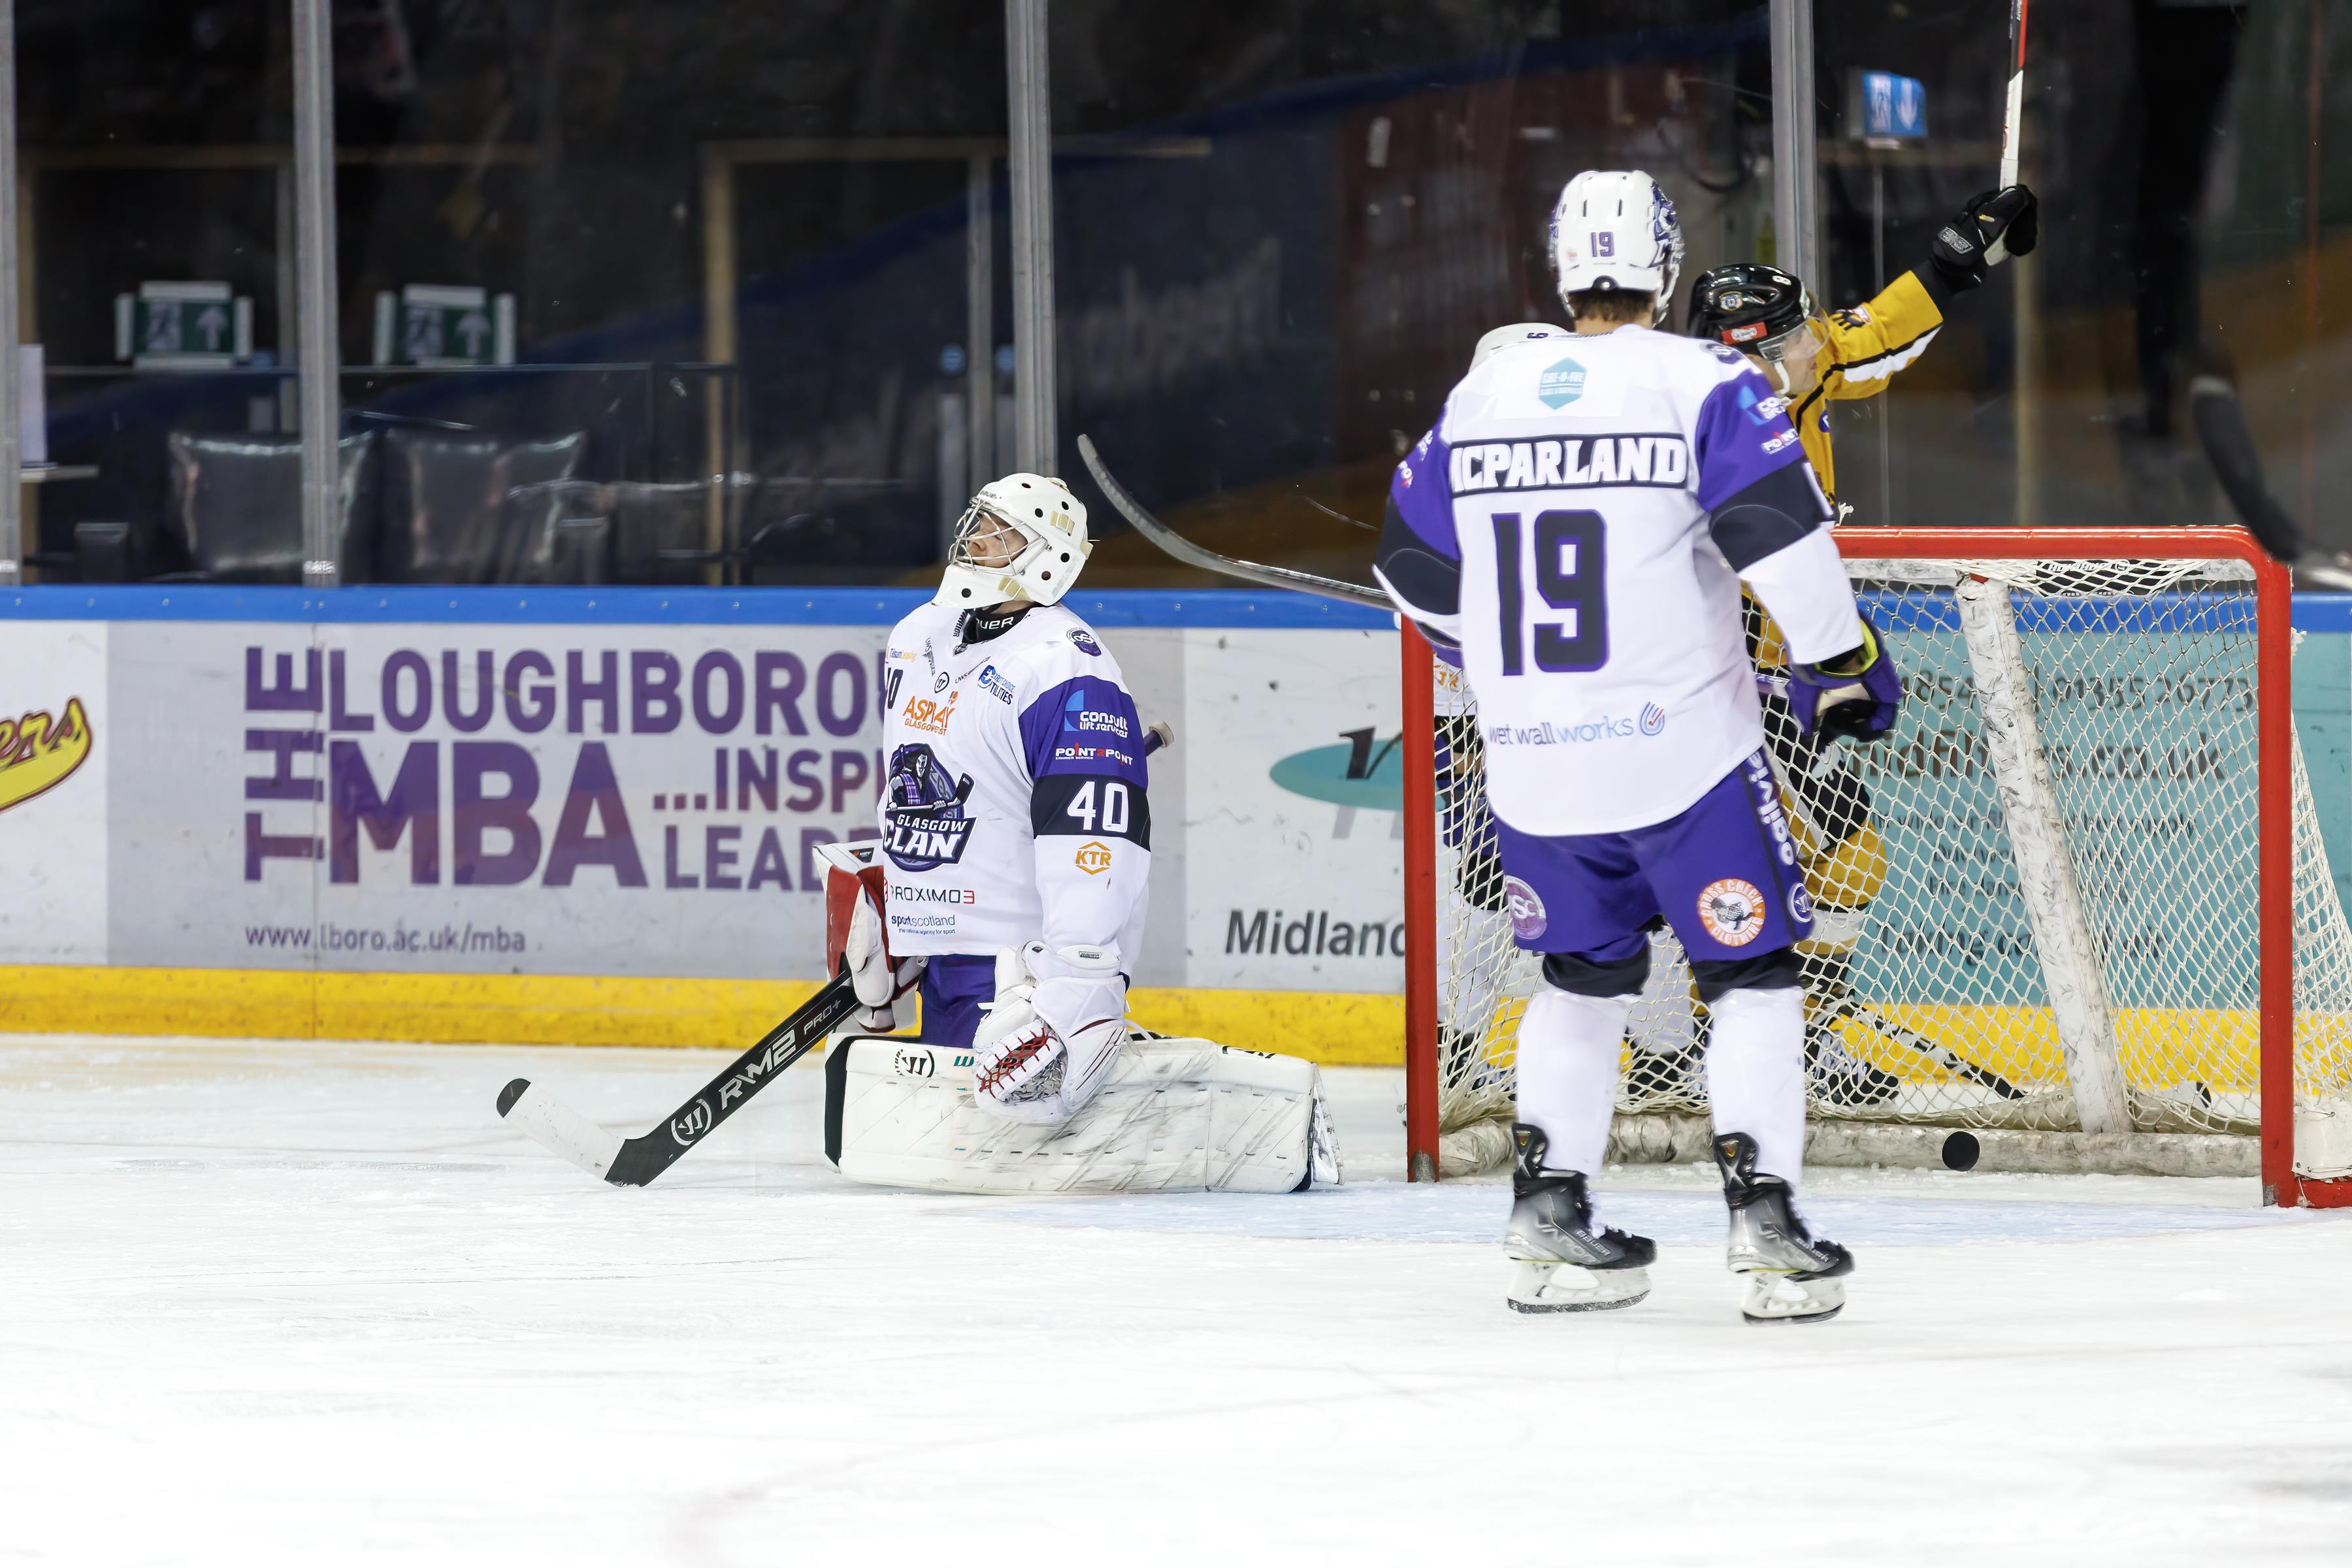 MYERS BECOMES FIFTH PLAYER TO REACH 600 EIHL POINTS Top Image